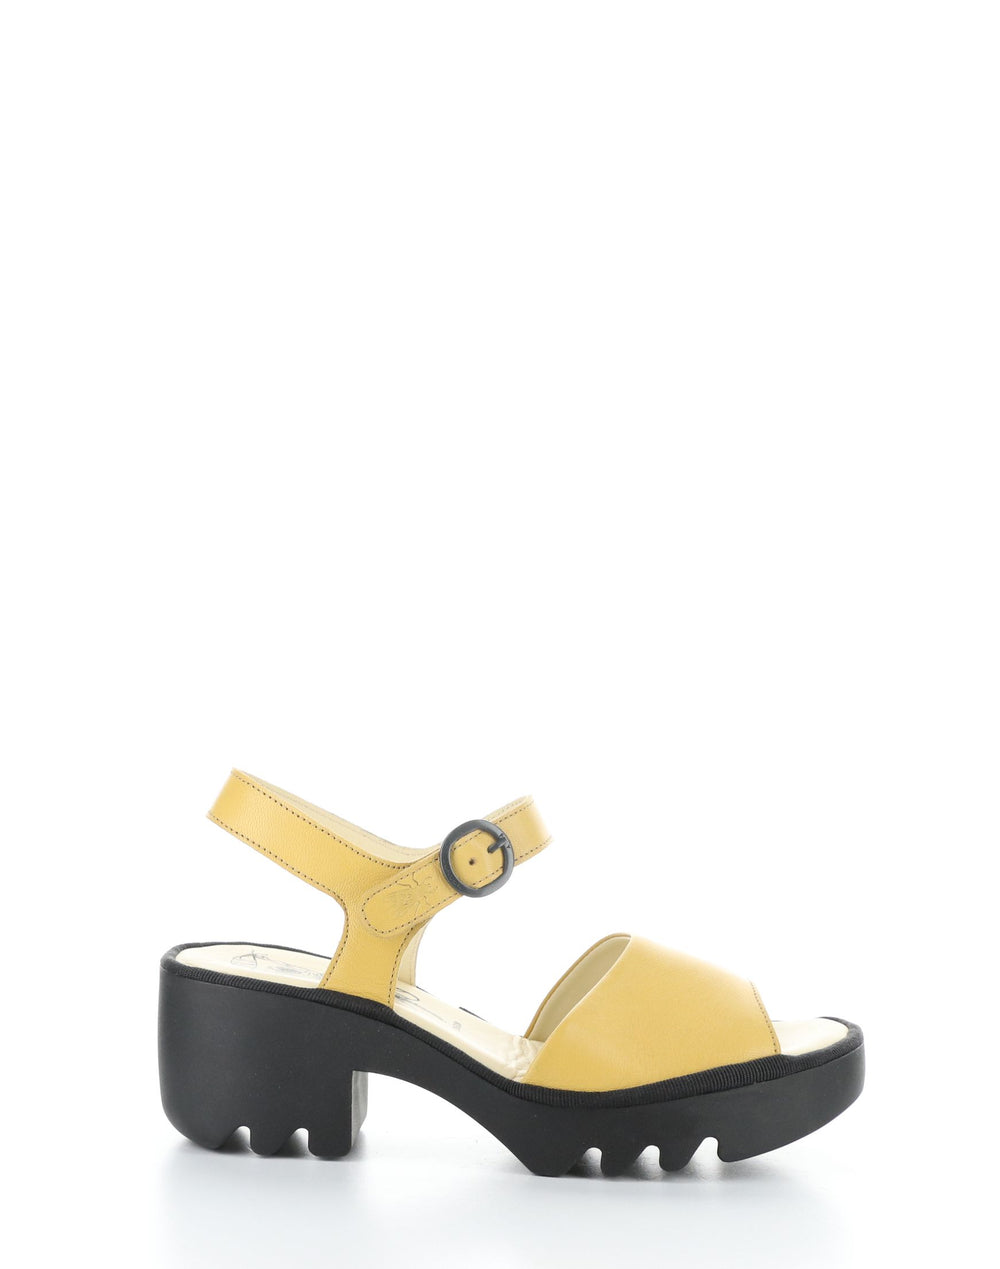 TULL503FLY 004 BUMBLEBEE Velcro Sandals